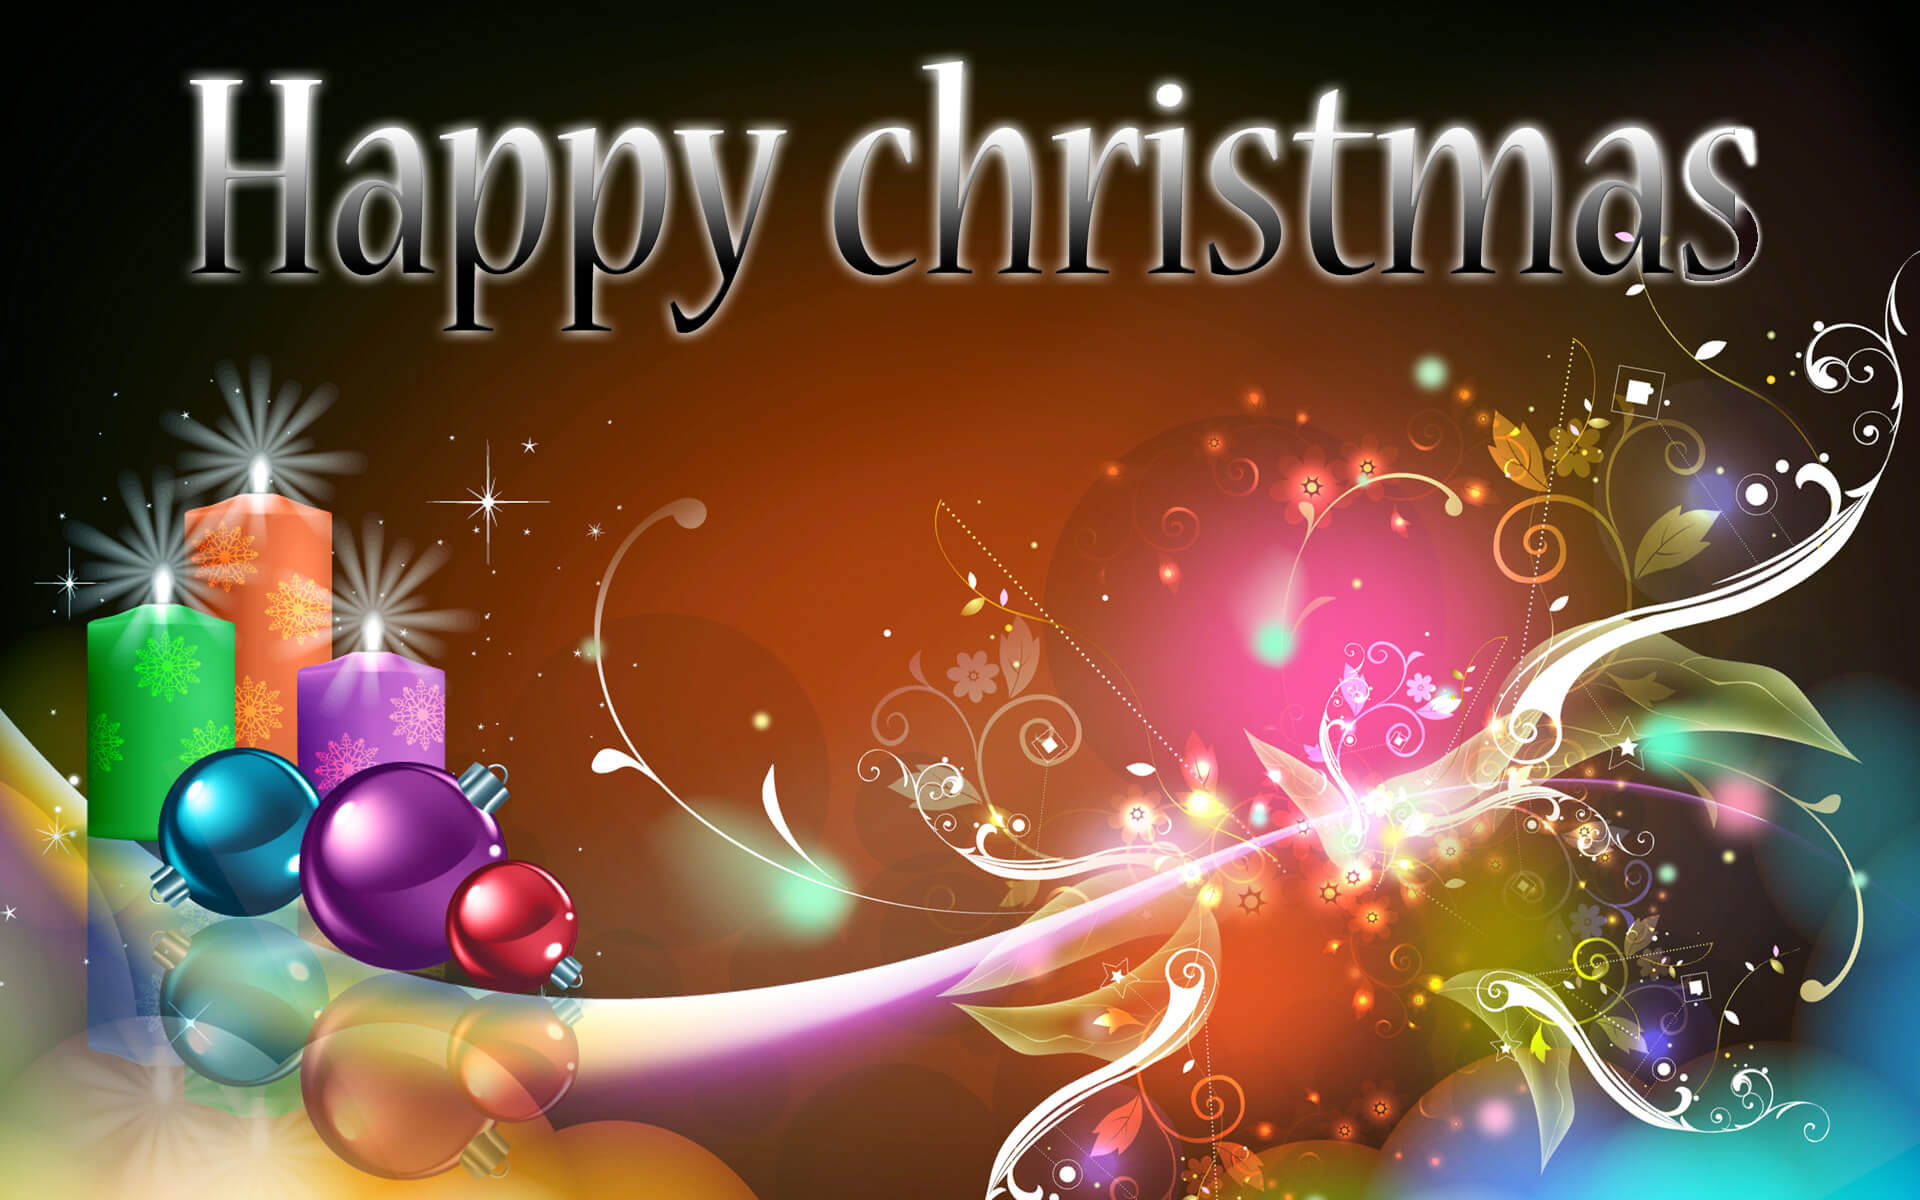 Happy-Christmas-Day-Images.jpg